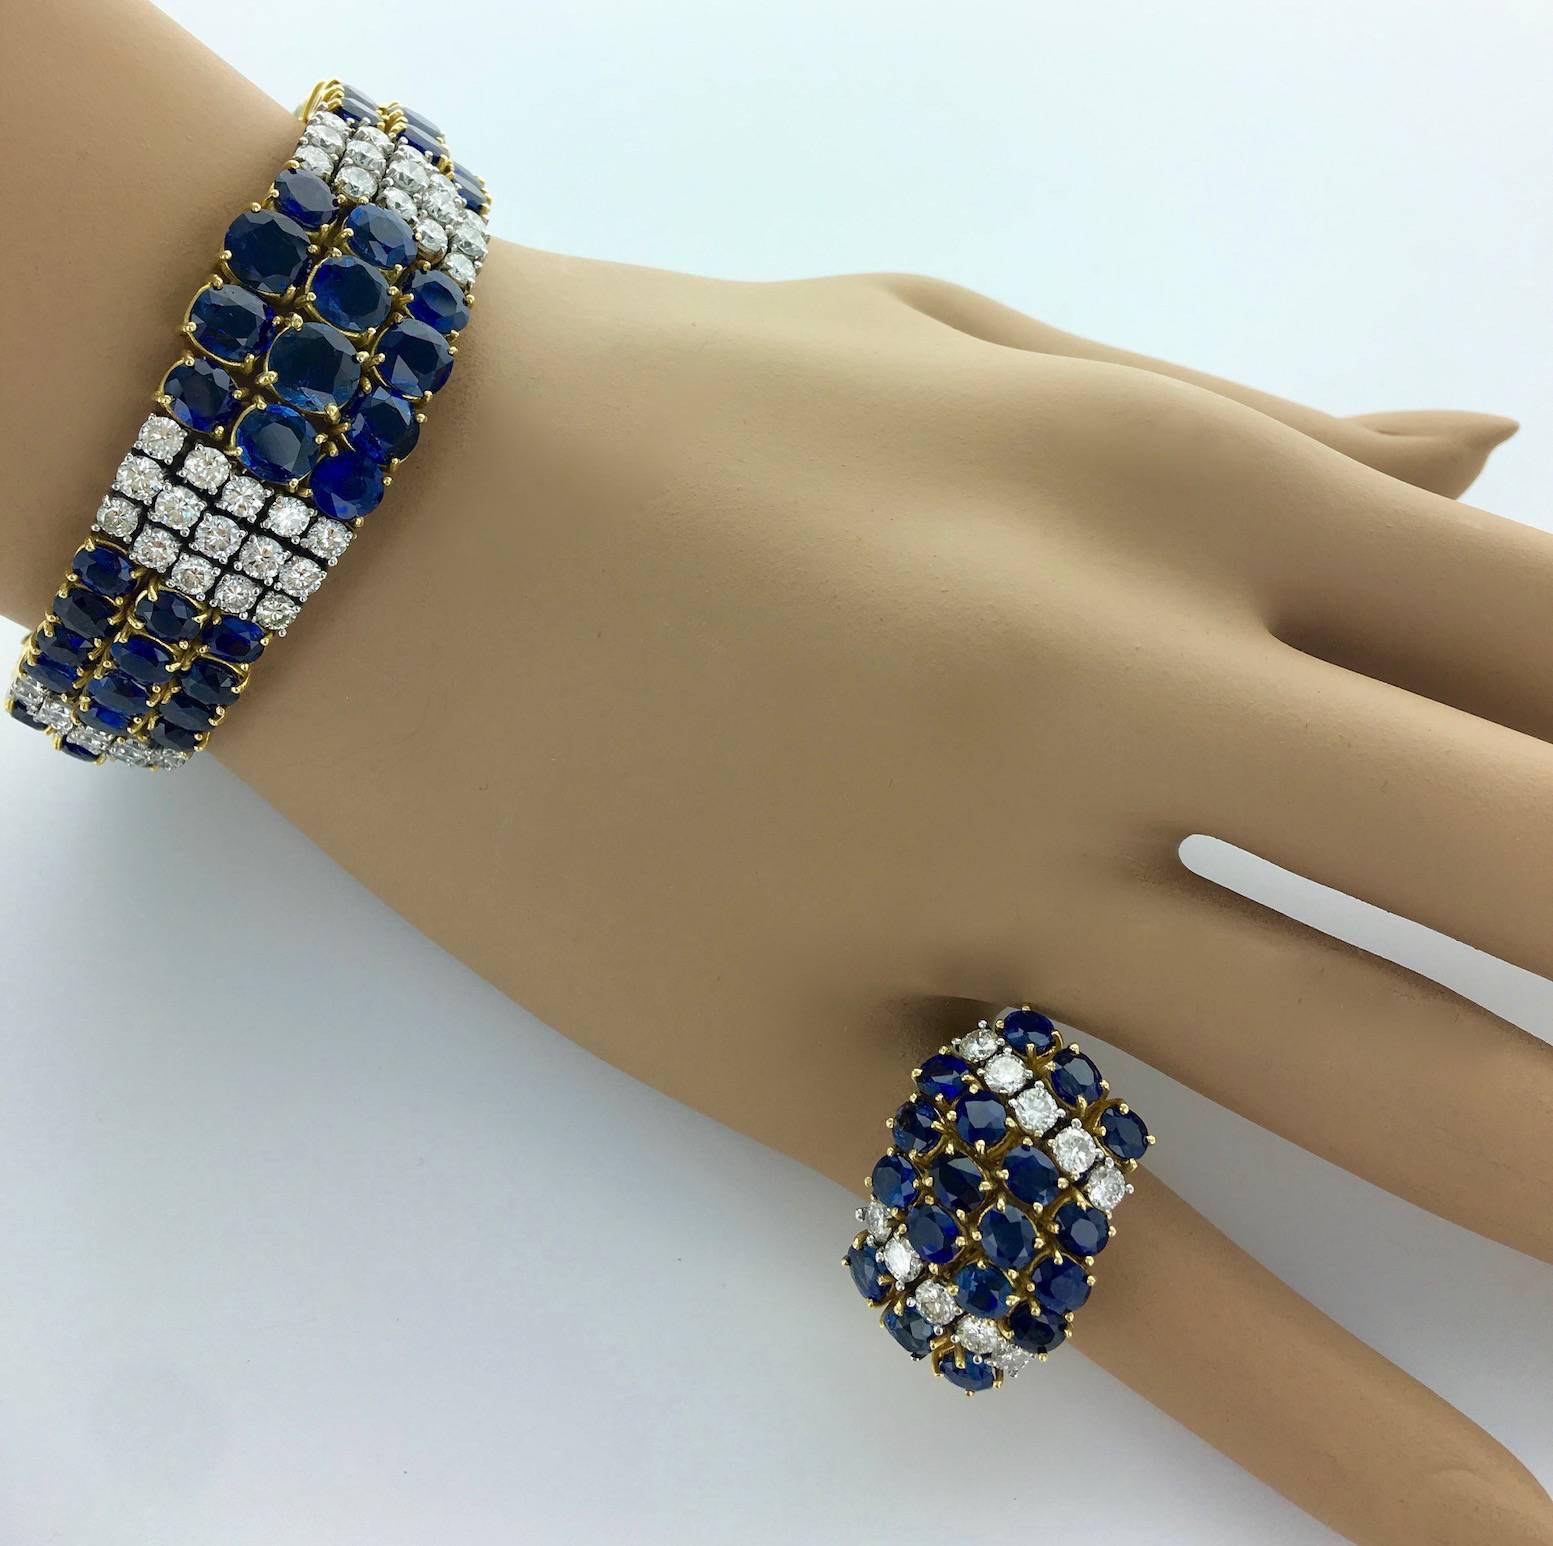 Full set including a Necklace, a Bracelet, a Ring and a pair of Earrings.
Blue Sapphire and Diamond on Gold.
Circa 1970.